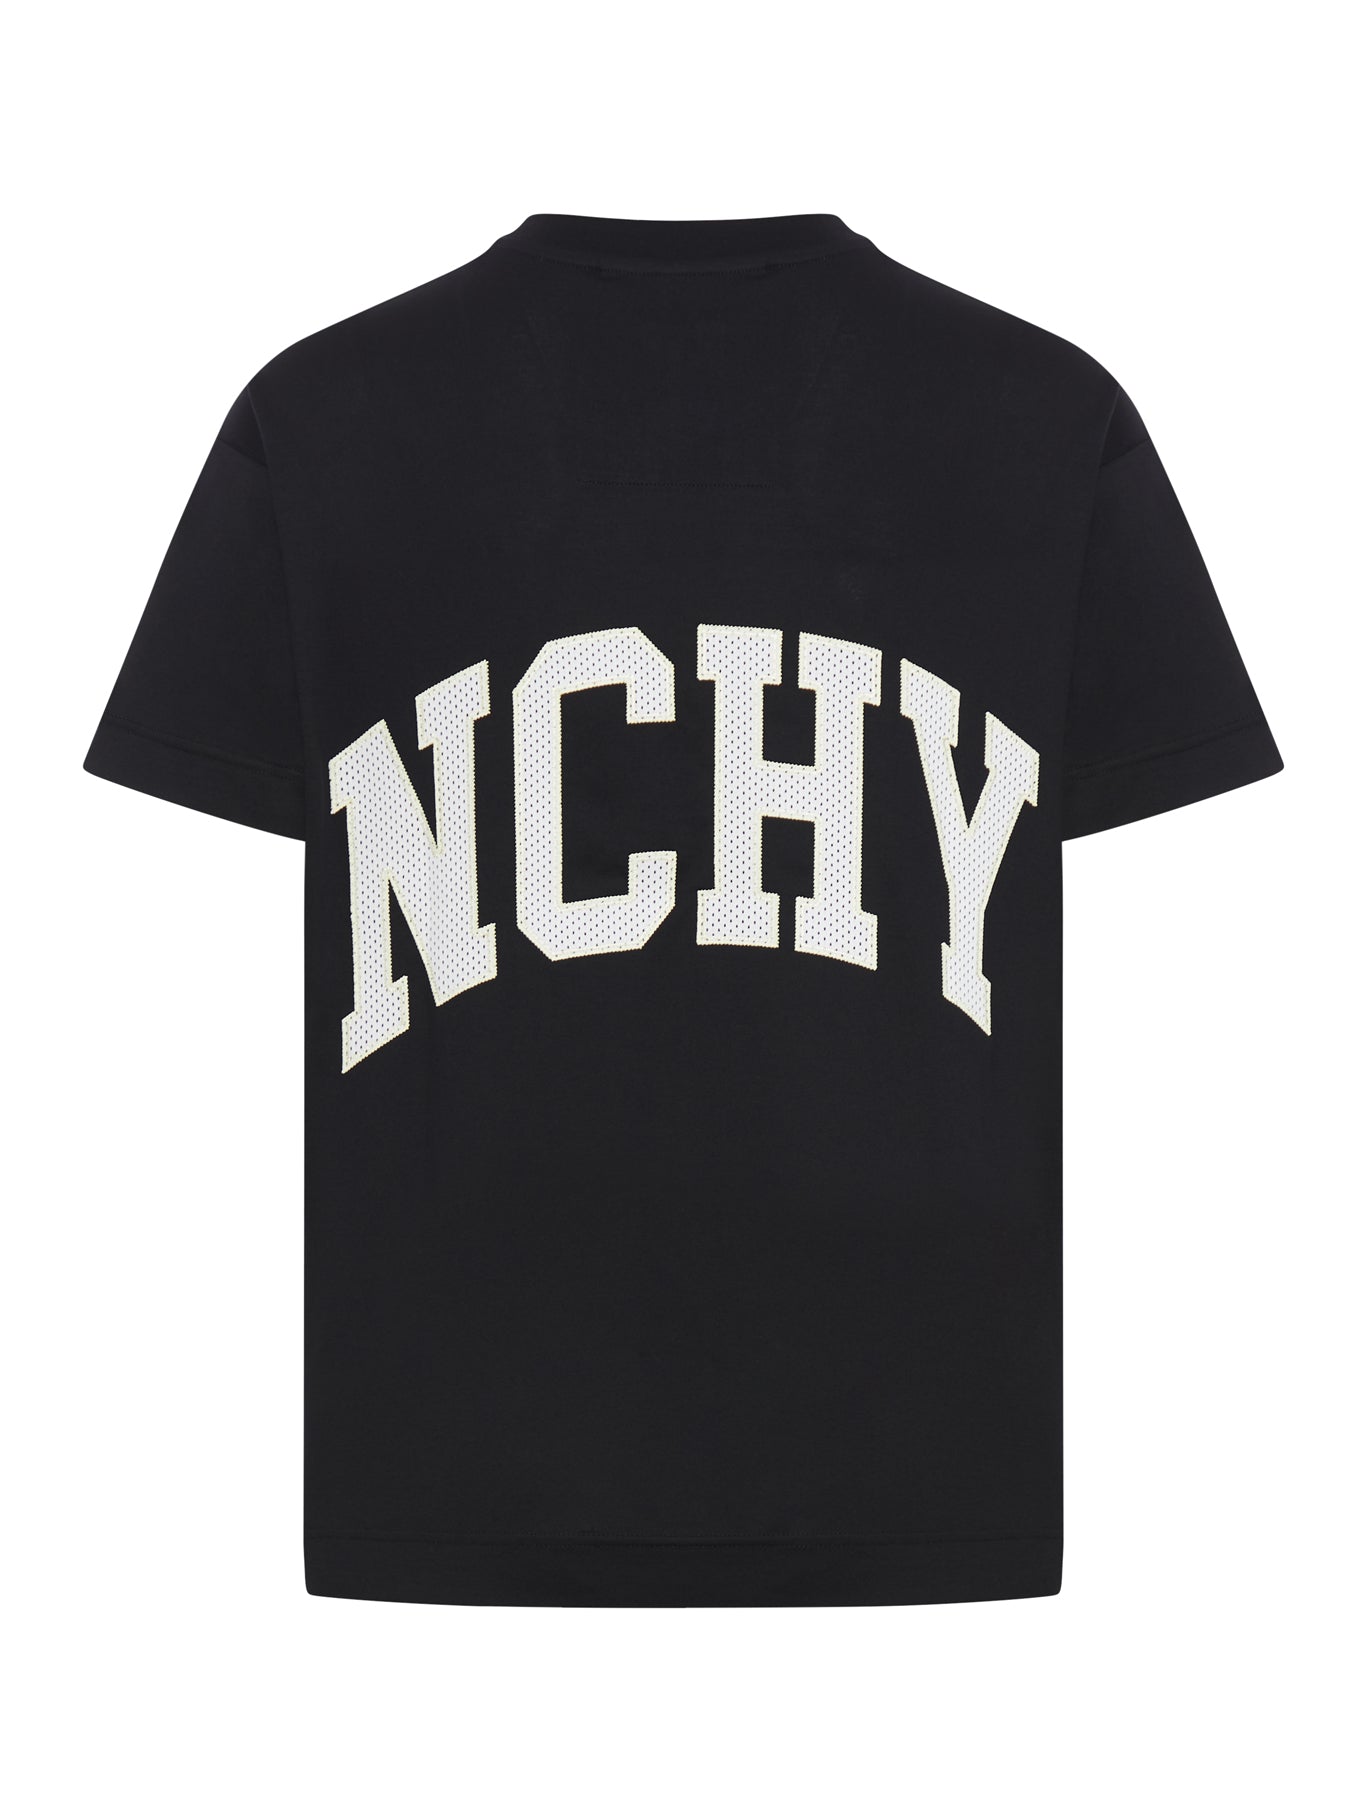 t-shirt with embroidered logo